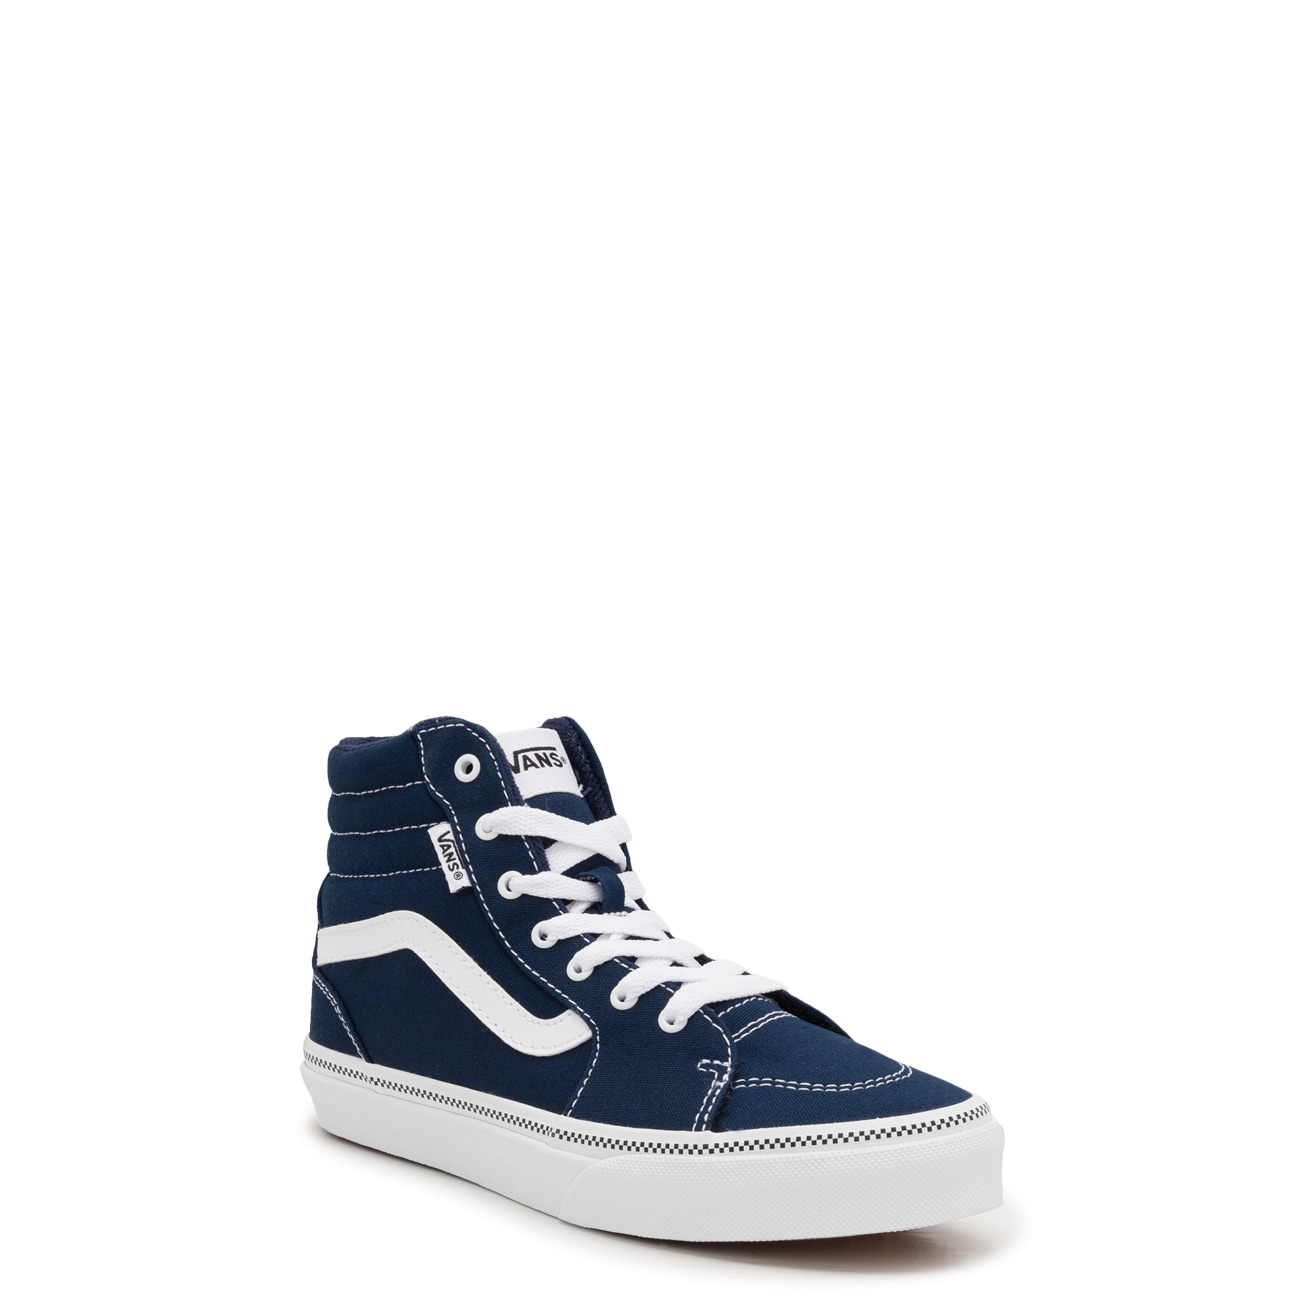 Youth Boys' Filmore High Top Sneaker